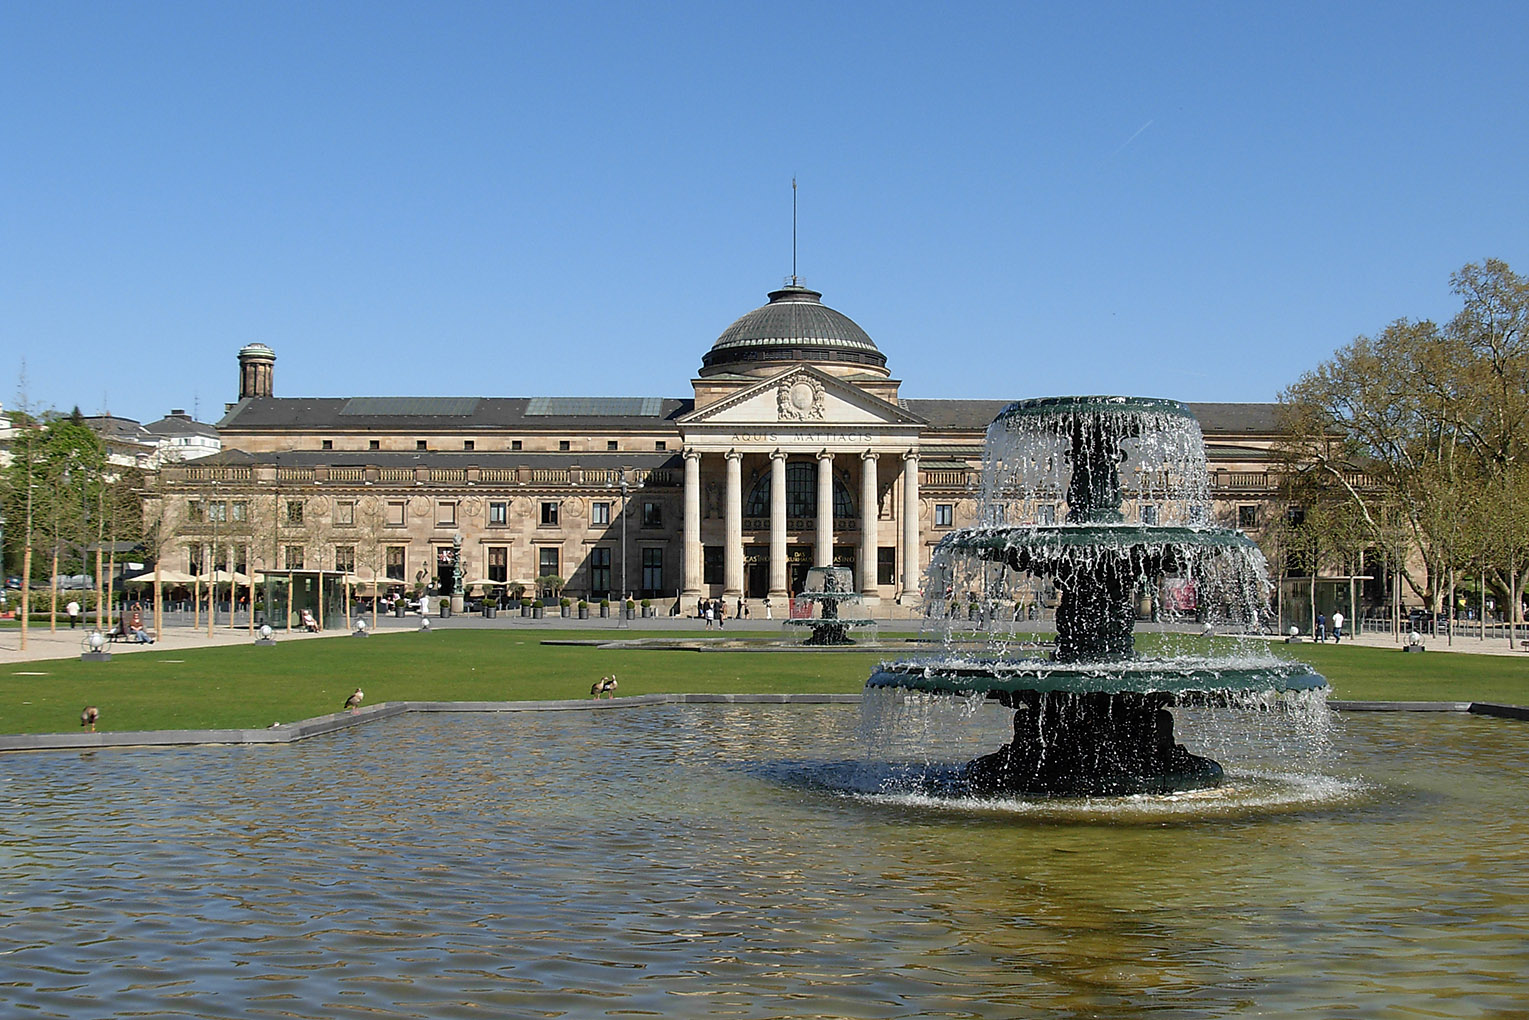 "Bowling Green & Kurhaus Wiesbaden" by Pedelecs by Wikivoyage and Wikipedia. Licensed under CC BY-SA 3.0 via Wikimedia Commons - https://commons.wikimedia.org/wiki/File:Bowling_Green_%26_Kurhaus_Wiesbaden.jpg#/media/File:Bowling_Green_%26_Kurhaus_Wiesbaden.jpg